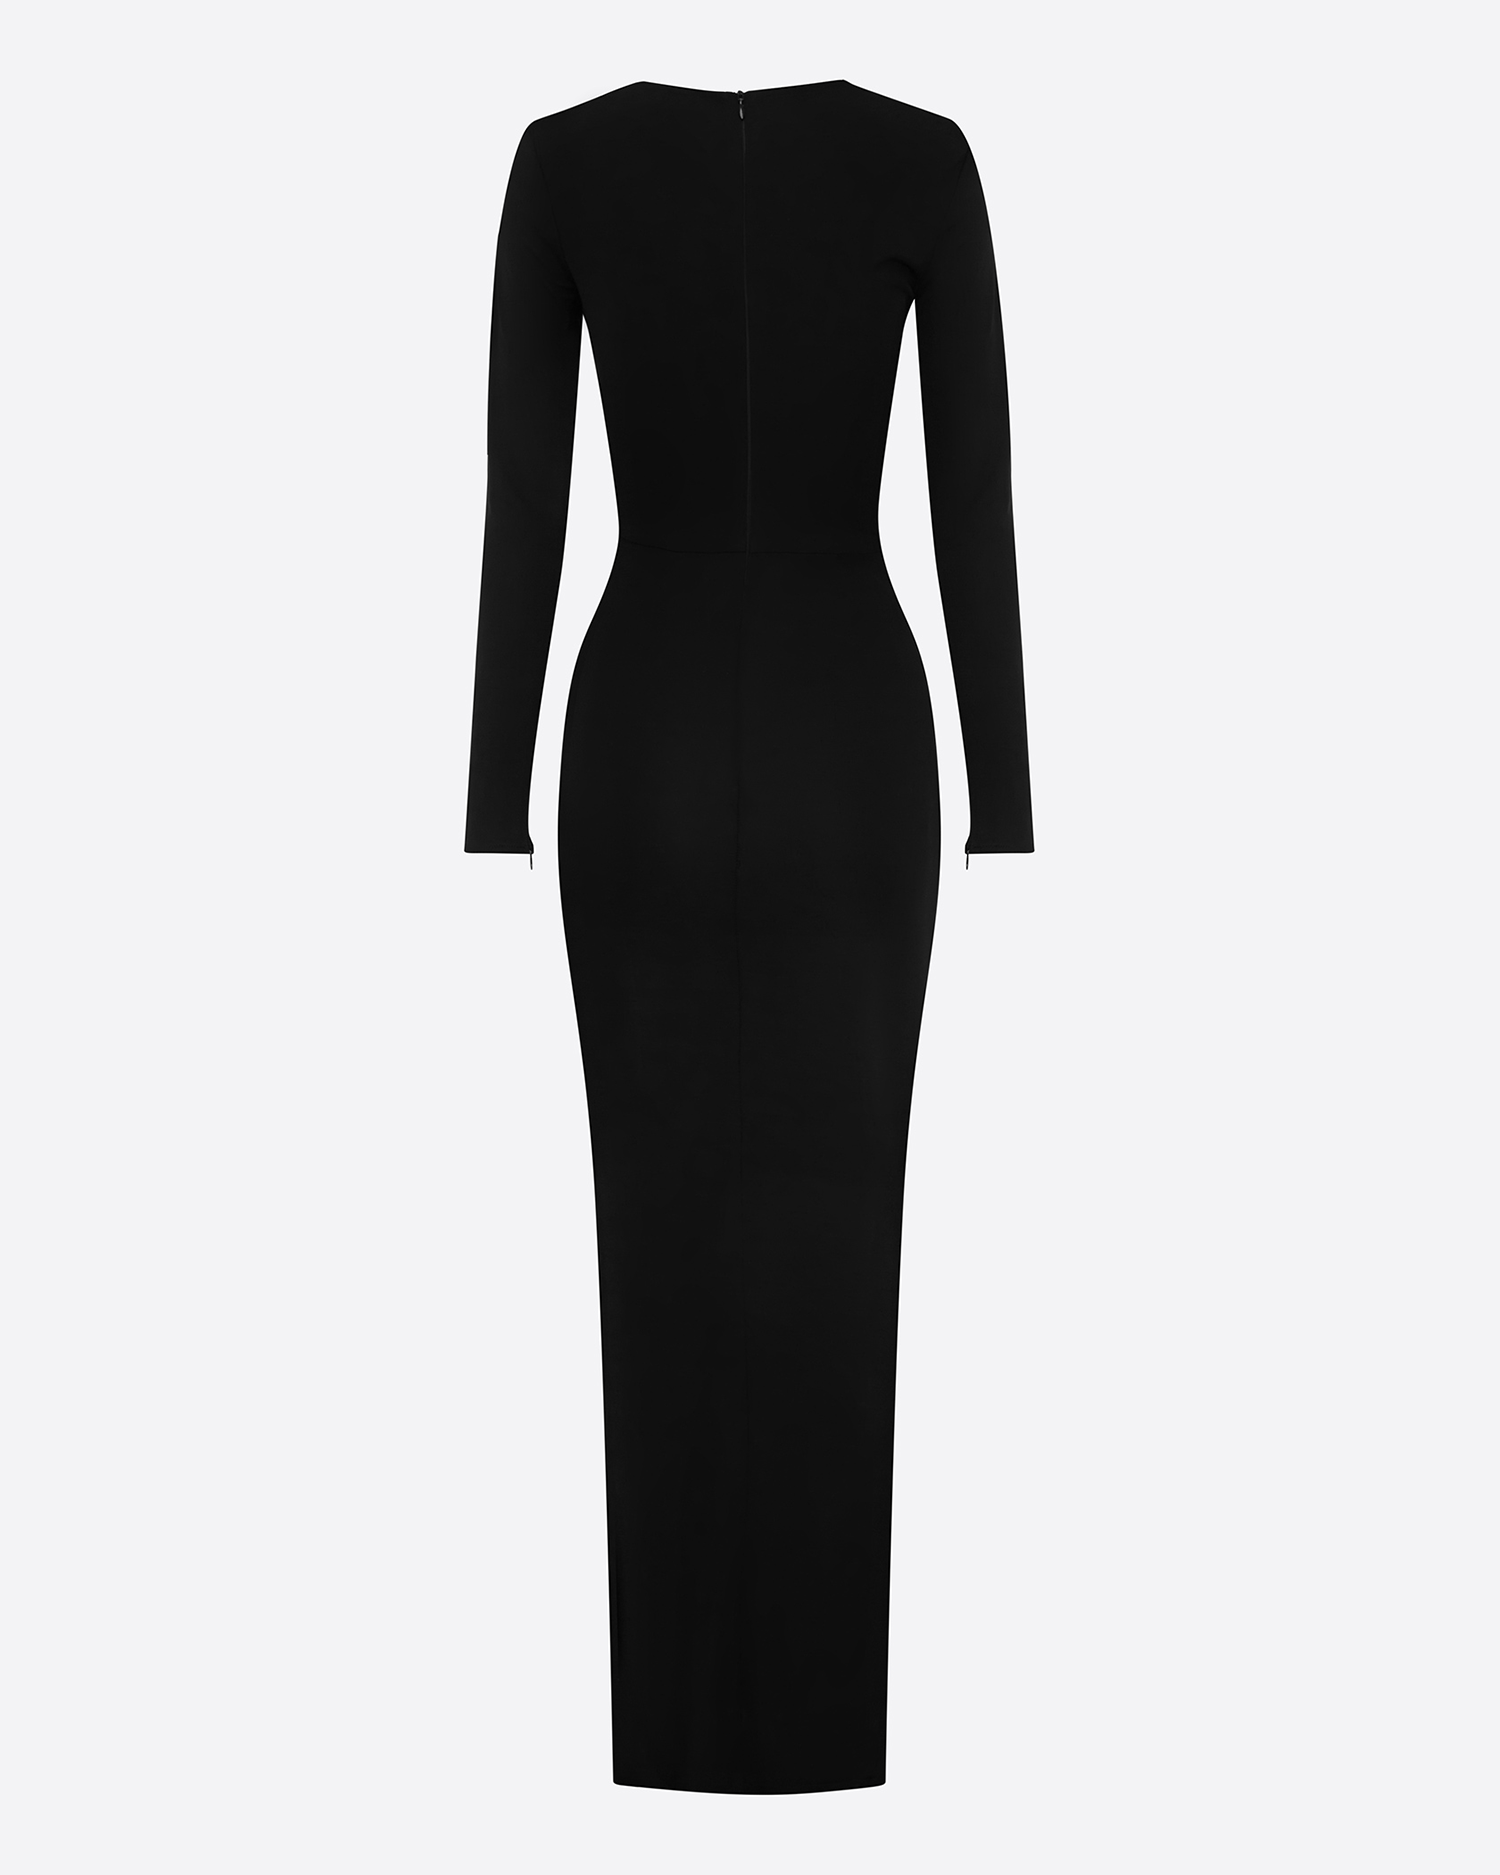 Long Sleeve Angled Cut Out Dress in Viscose Jersey